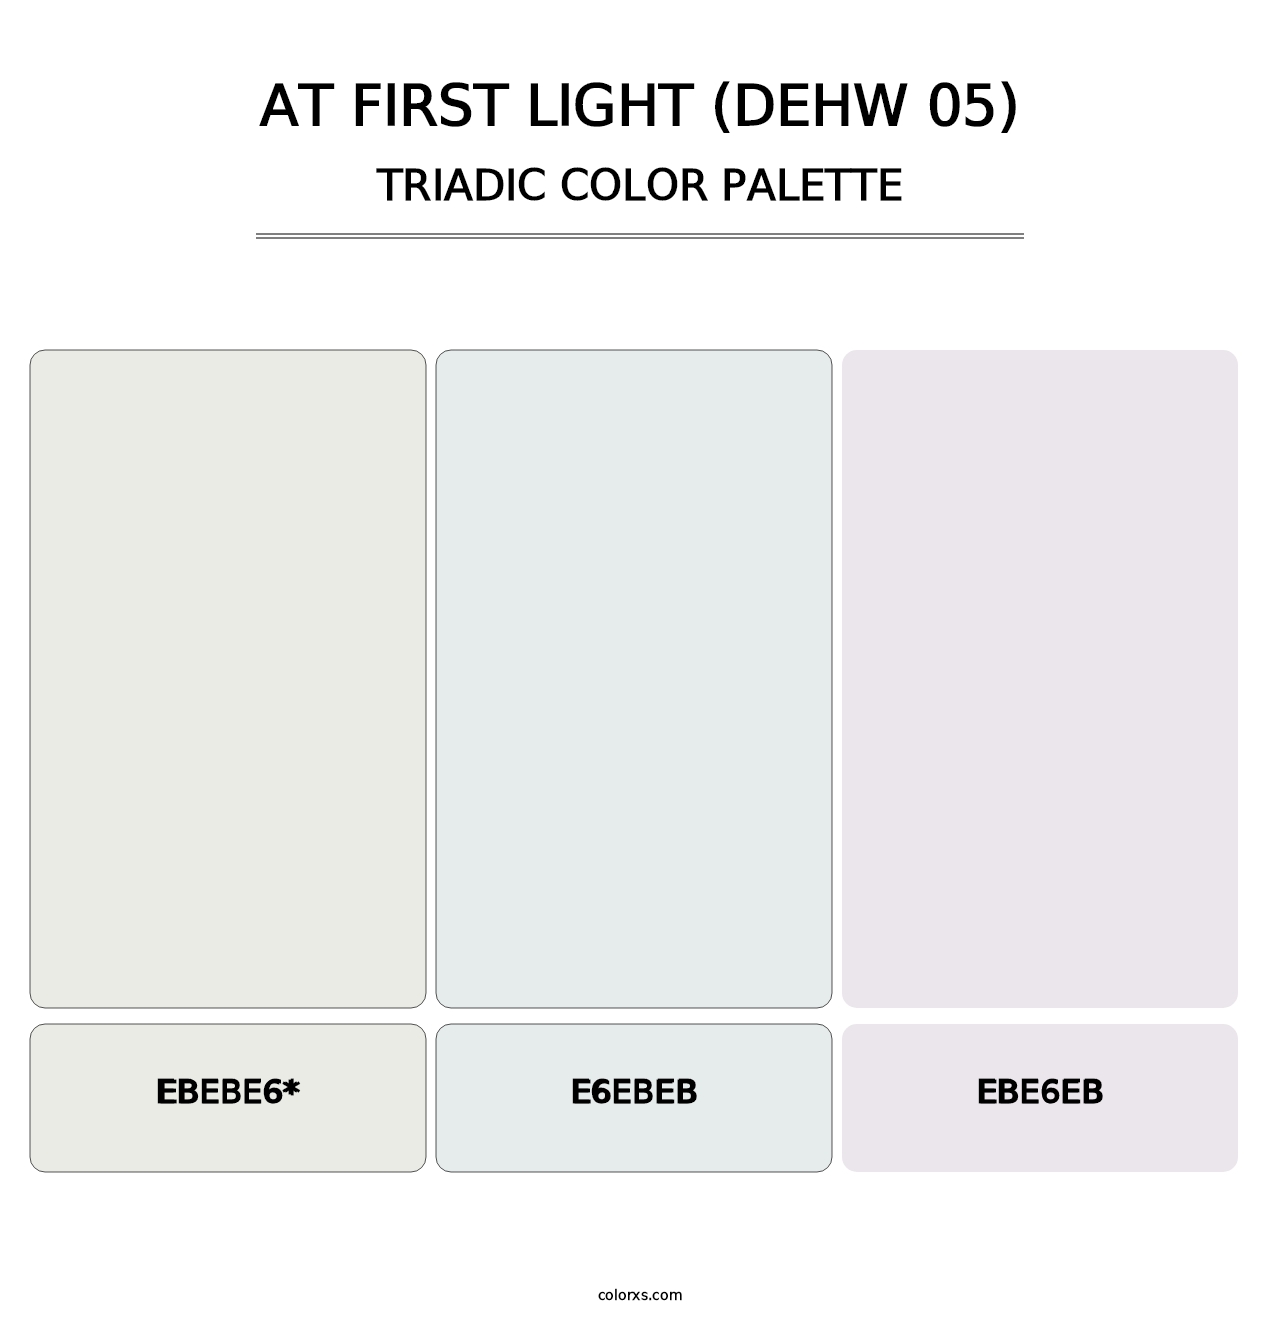 At First Light (DEHW 05) - Triadic Color Palette